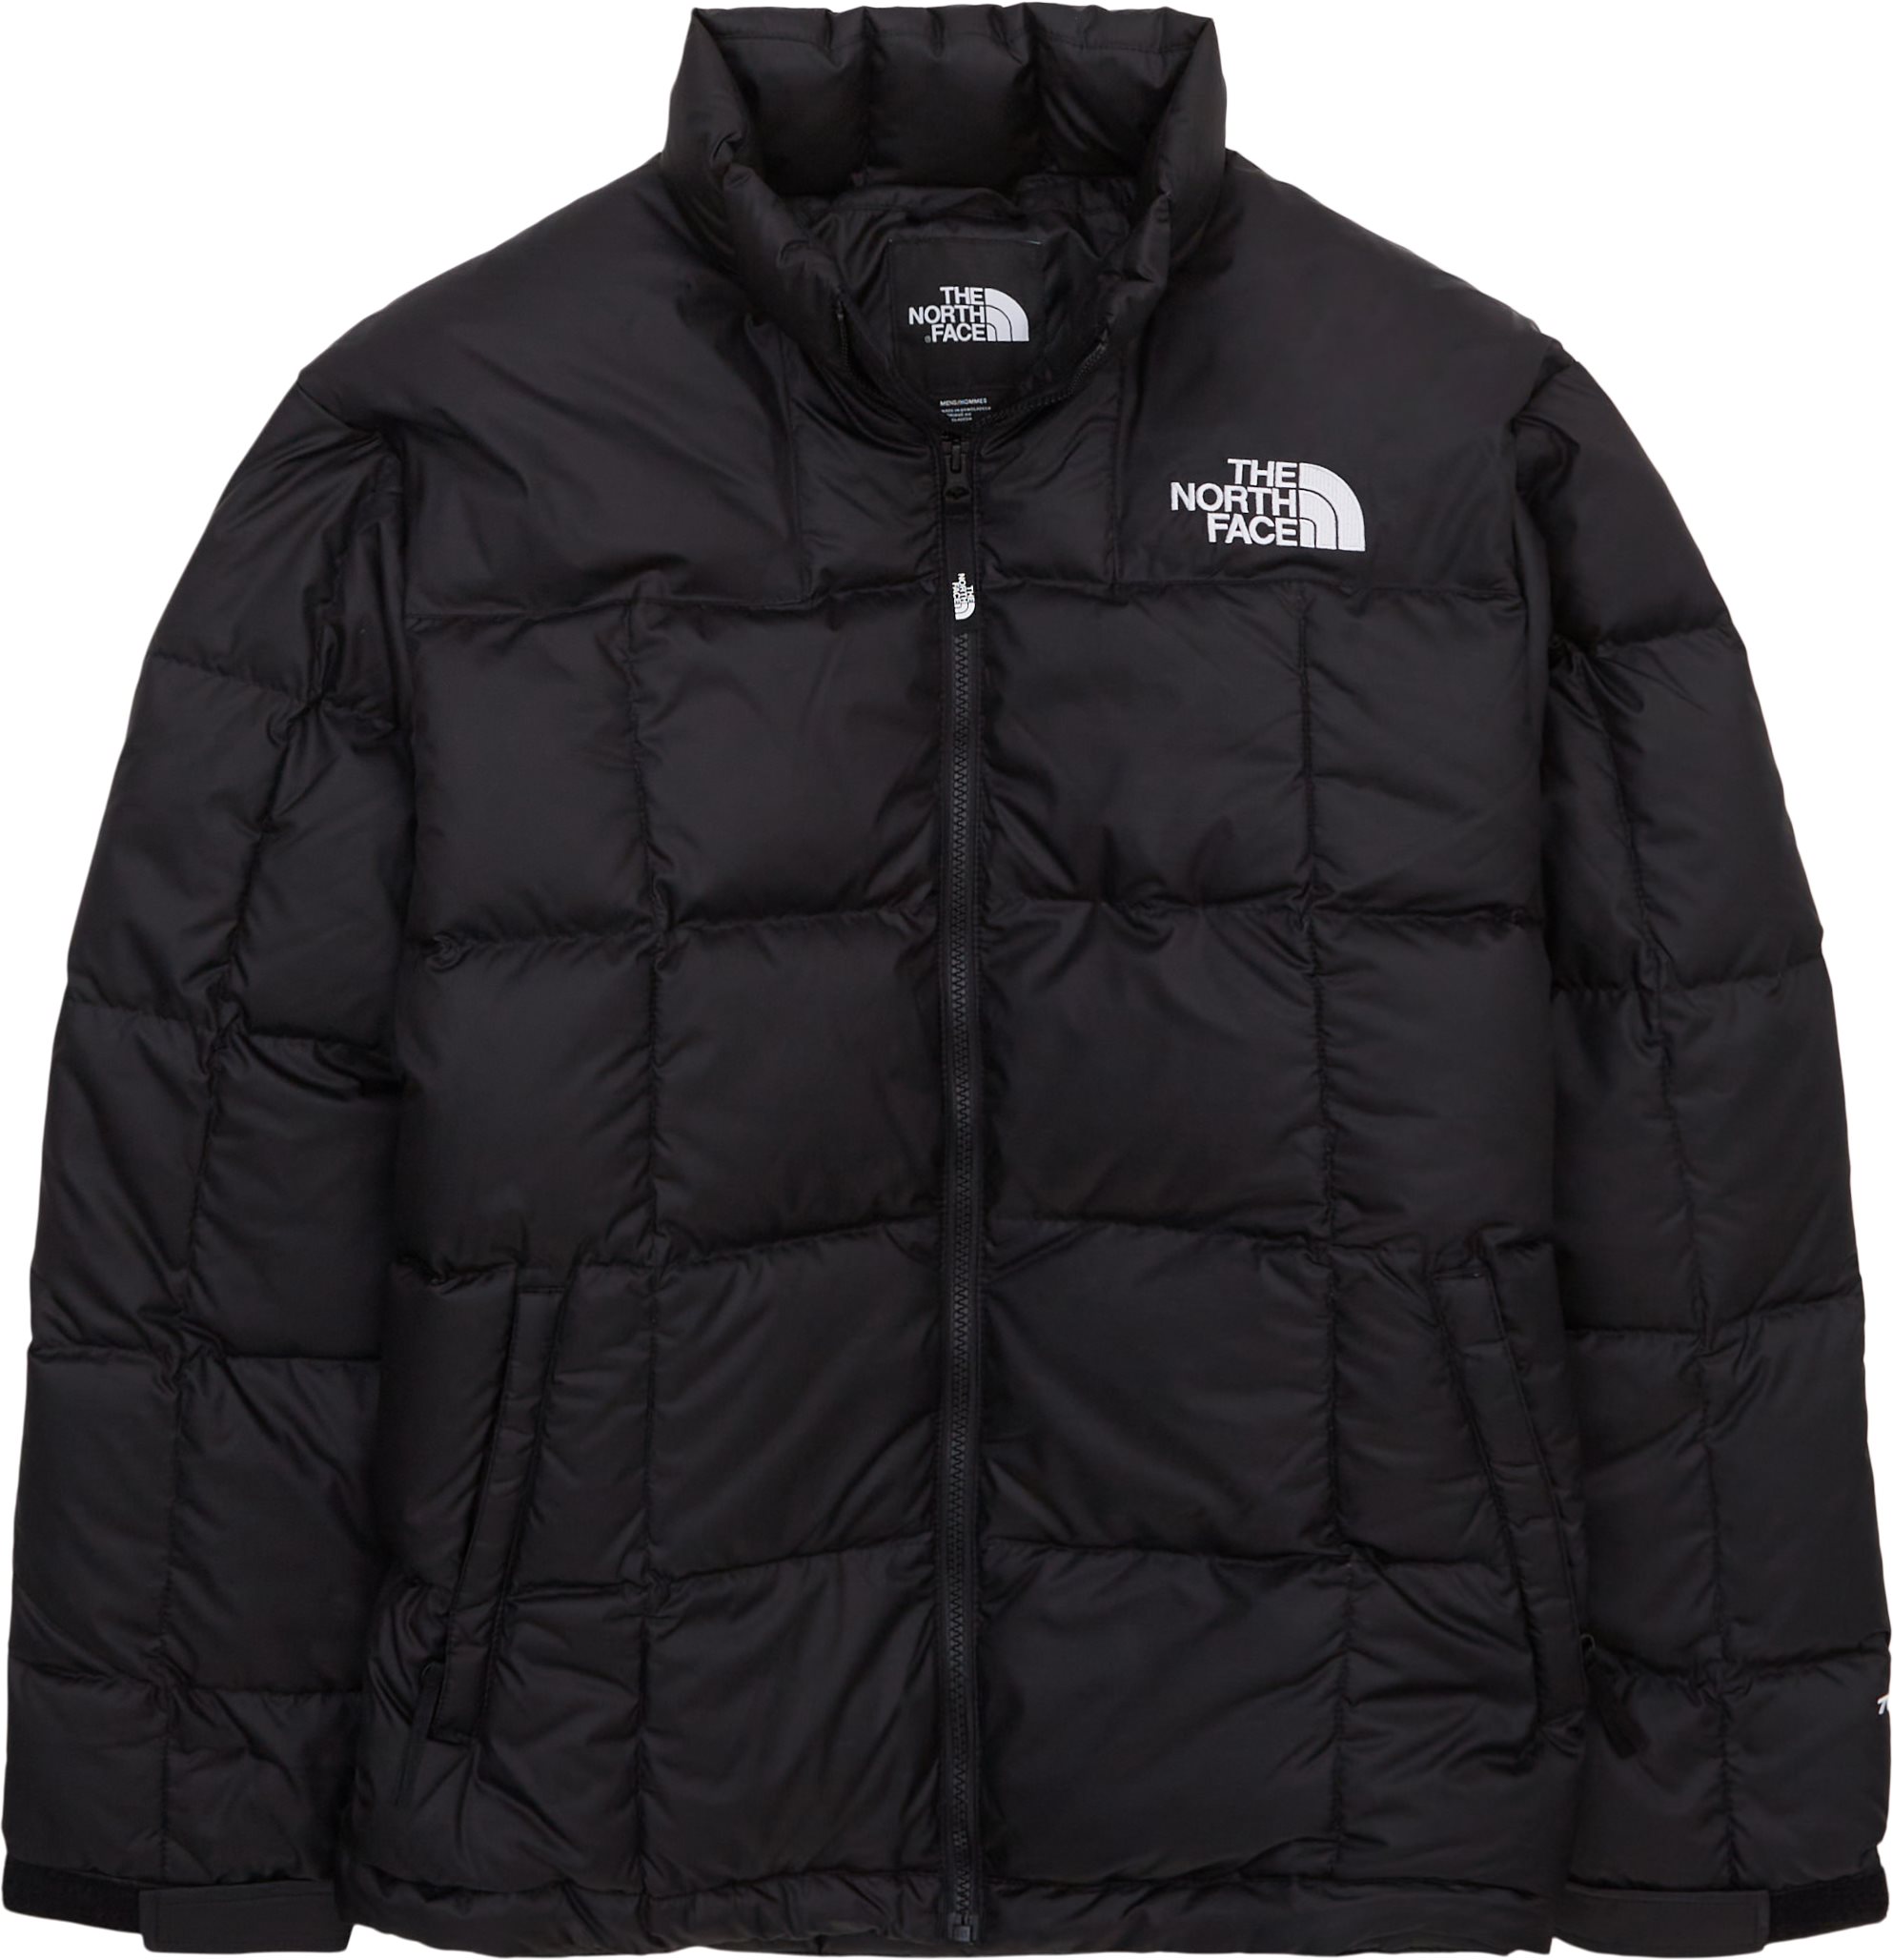 The North Face Jackets LHOTSE JACKET NF0A3Y23 2023 Black